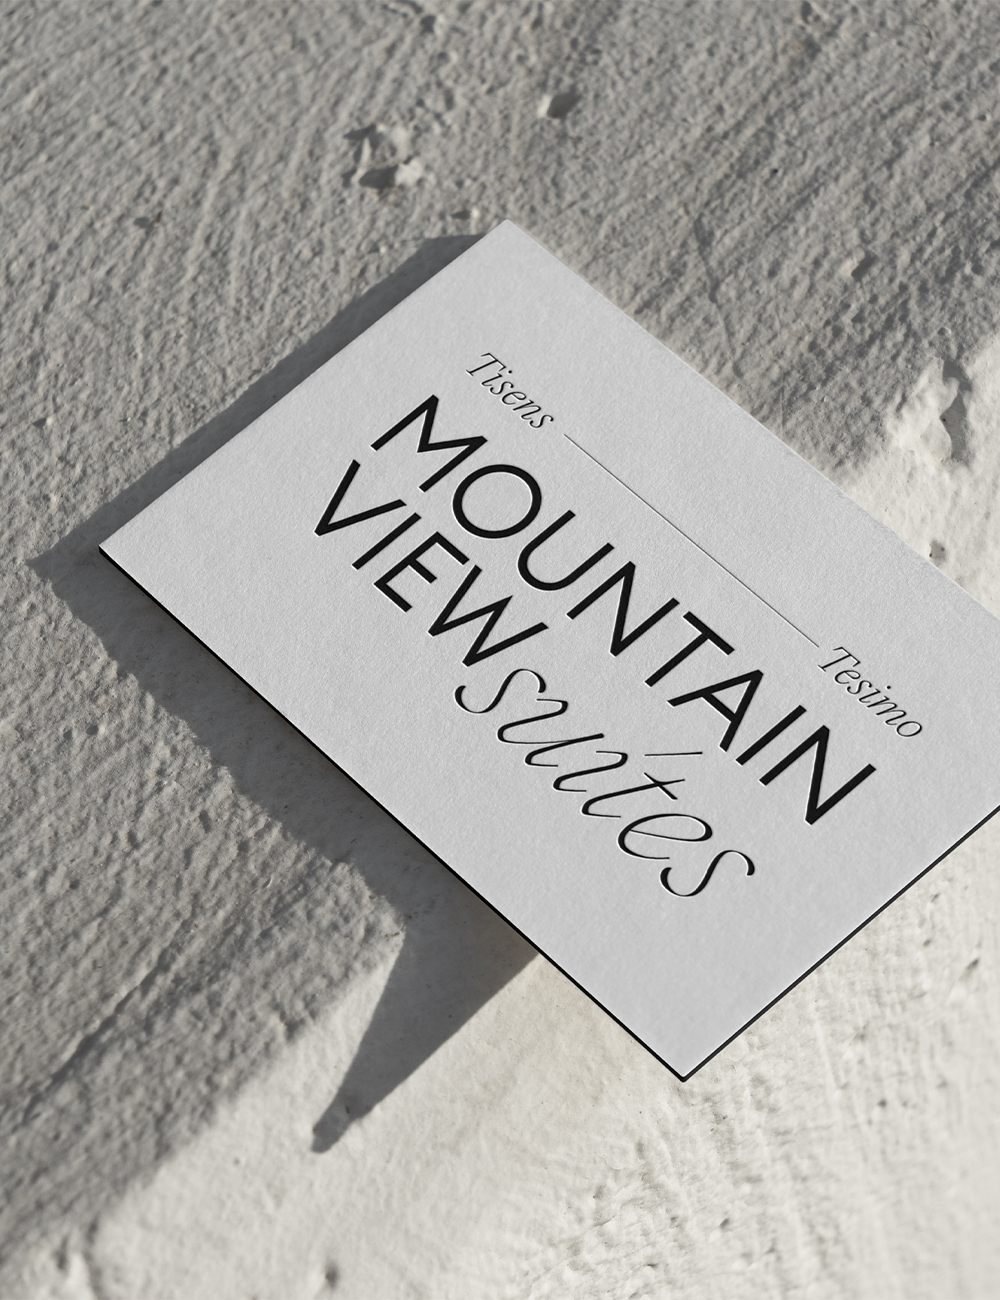 Mountain View Suites